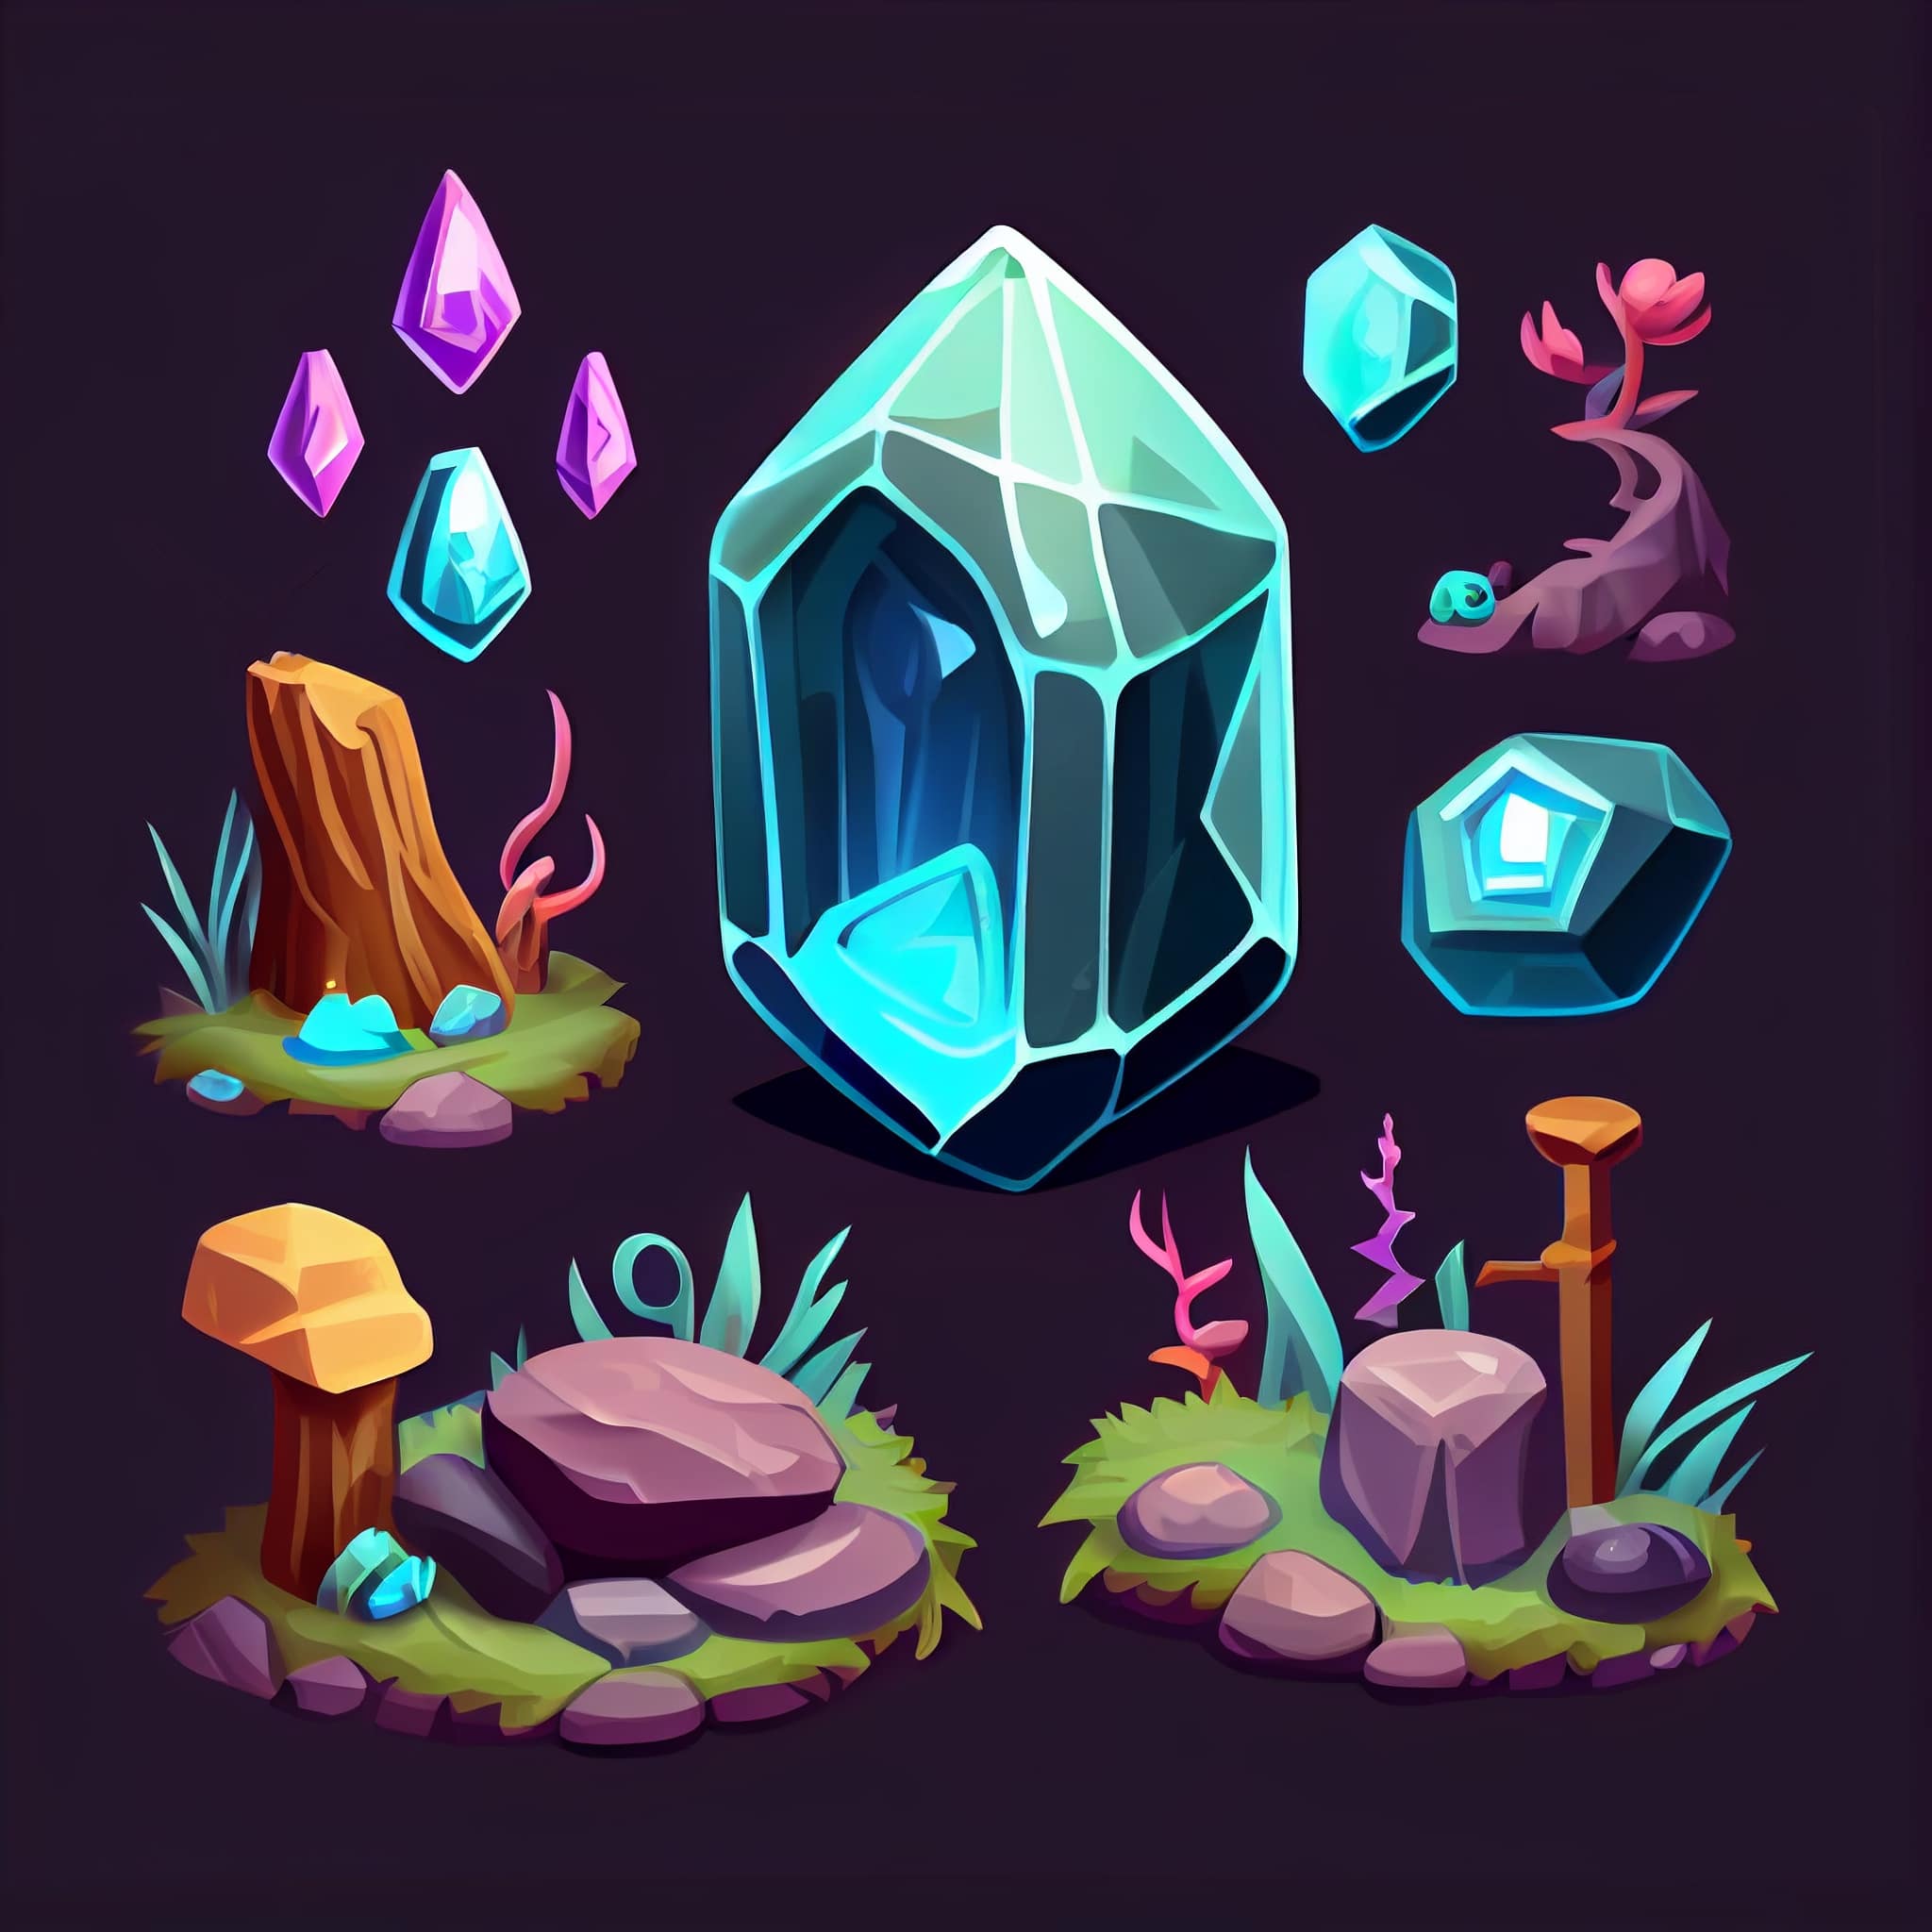 Set of different crystals and rocks on a dark background.